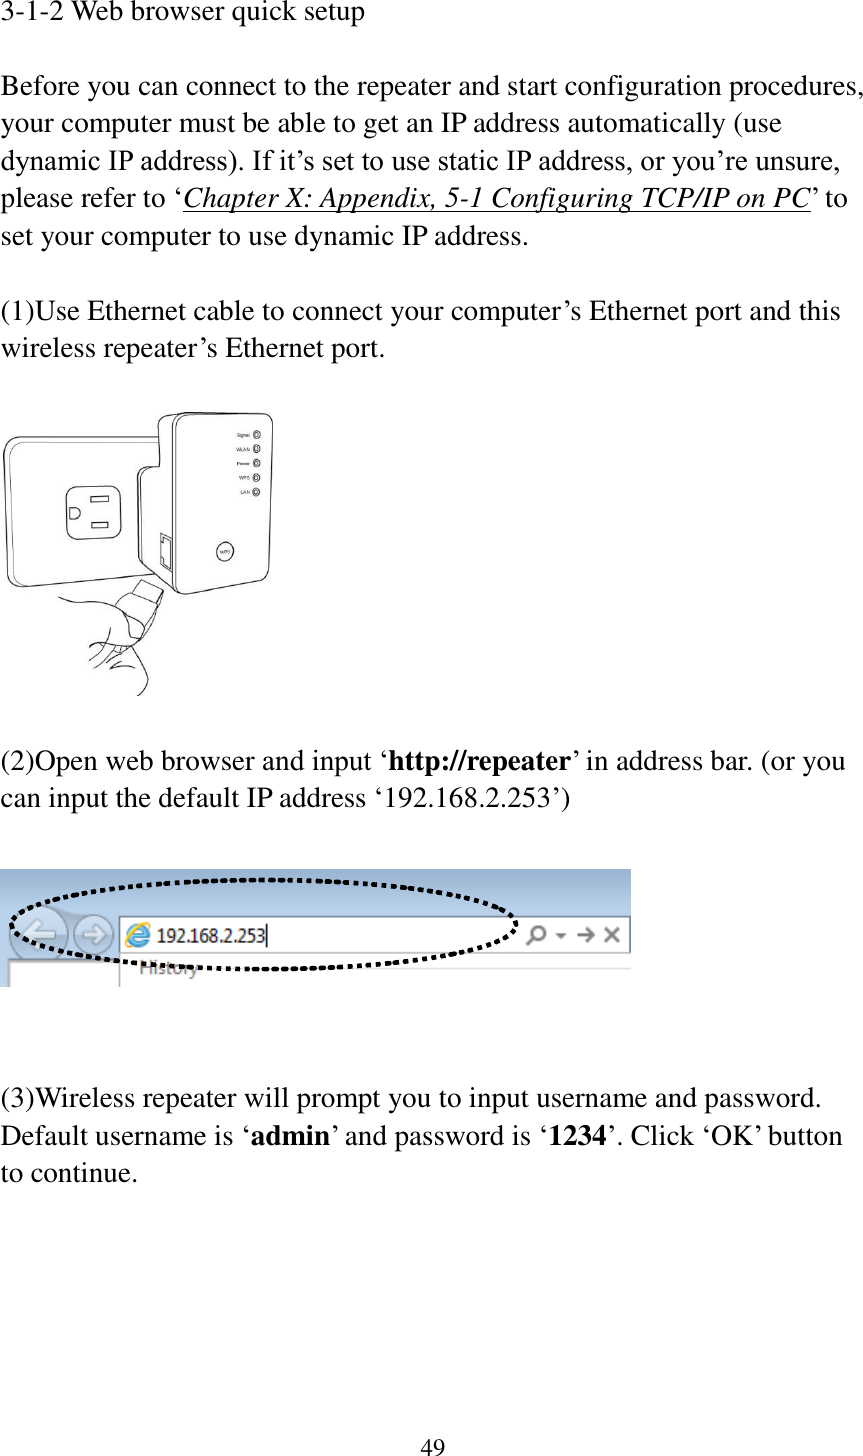 49  3-1-2 Web browser quick setup  Before you can connect to the repeater and start configuration procedures, your computer must be able to get an IP address automatically (use dynamic IP address). If it‟s set to use static IP address, or you‟re unsure, please refer to „Chapter X: Appendix, 5-1 Configuring TCP/IP on PC‟ to set your computer to use dynamic IP address.  (1)Use Ethernet cable to connect your computer‟s Ethernet port and this wireless repeater‟s Ethernet port.    (2)Open web browser and input „http://repeater‟ in address bar. (or you can input the default IP address „192.168.2.253‟)     (3)Wireless repeater will prompt you to input username and password. Default username is „admin‟ and password is „1234‟. Click „OK‟ button to continue.  